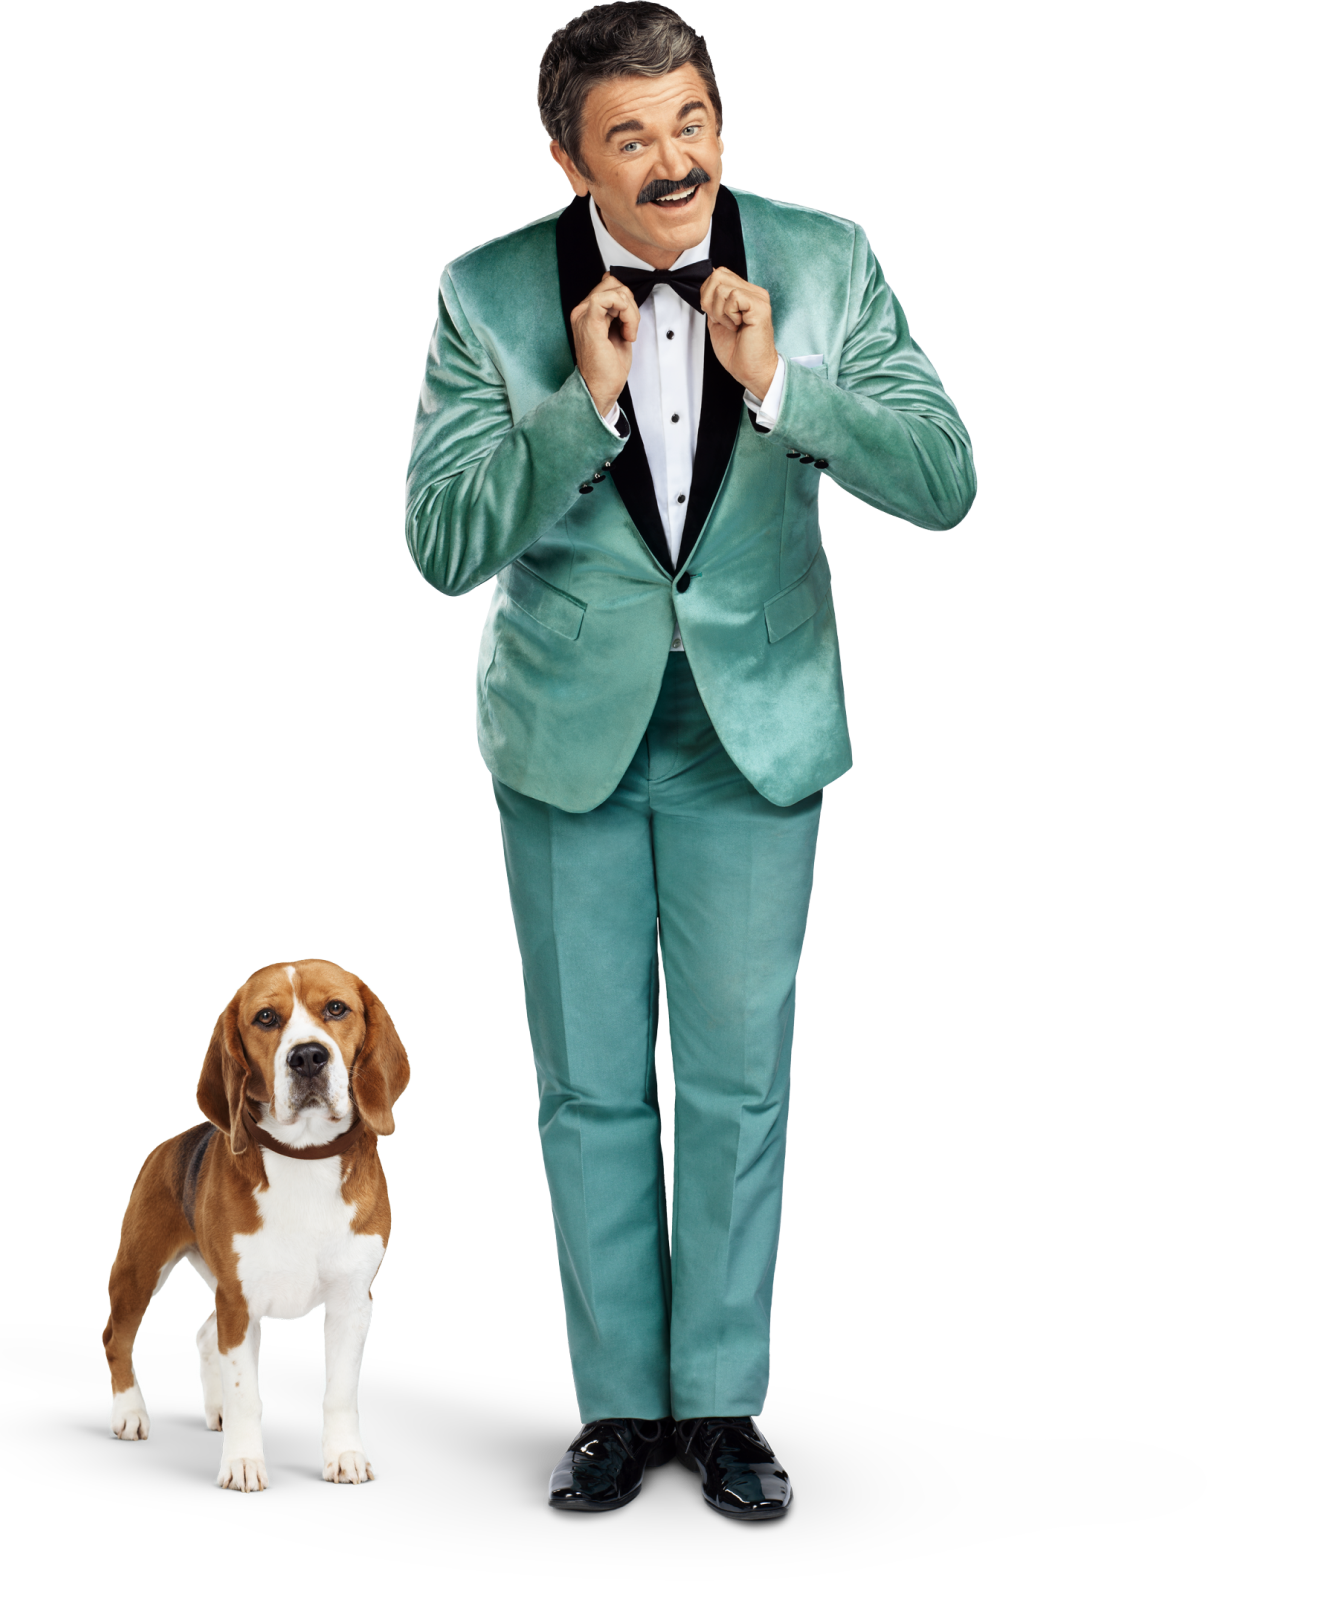 Man with mustache and tuxedo smiling with beagle standing to his left
